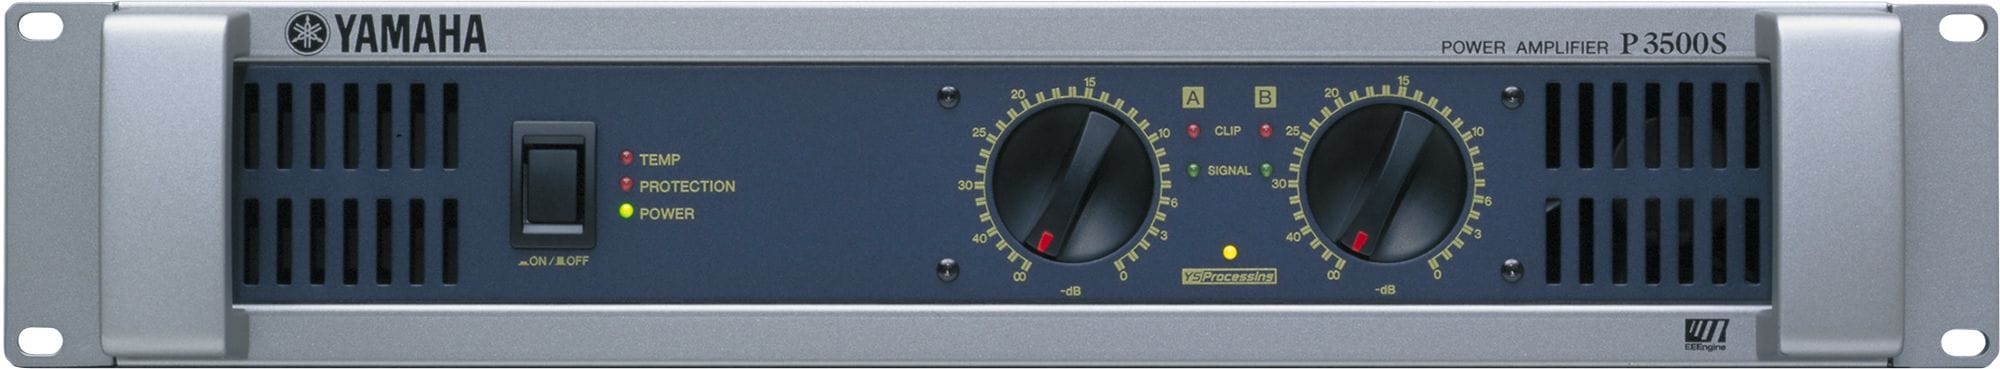 P Series - Overview - Power Amplifiers - Professional Audio 